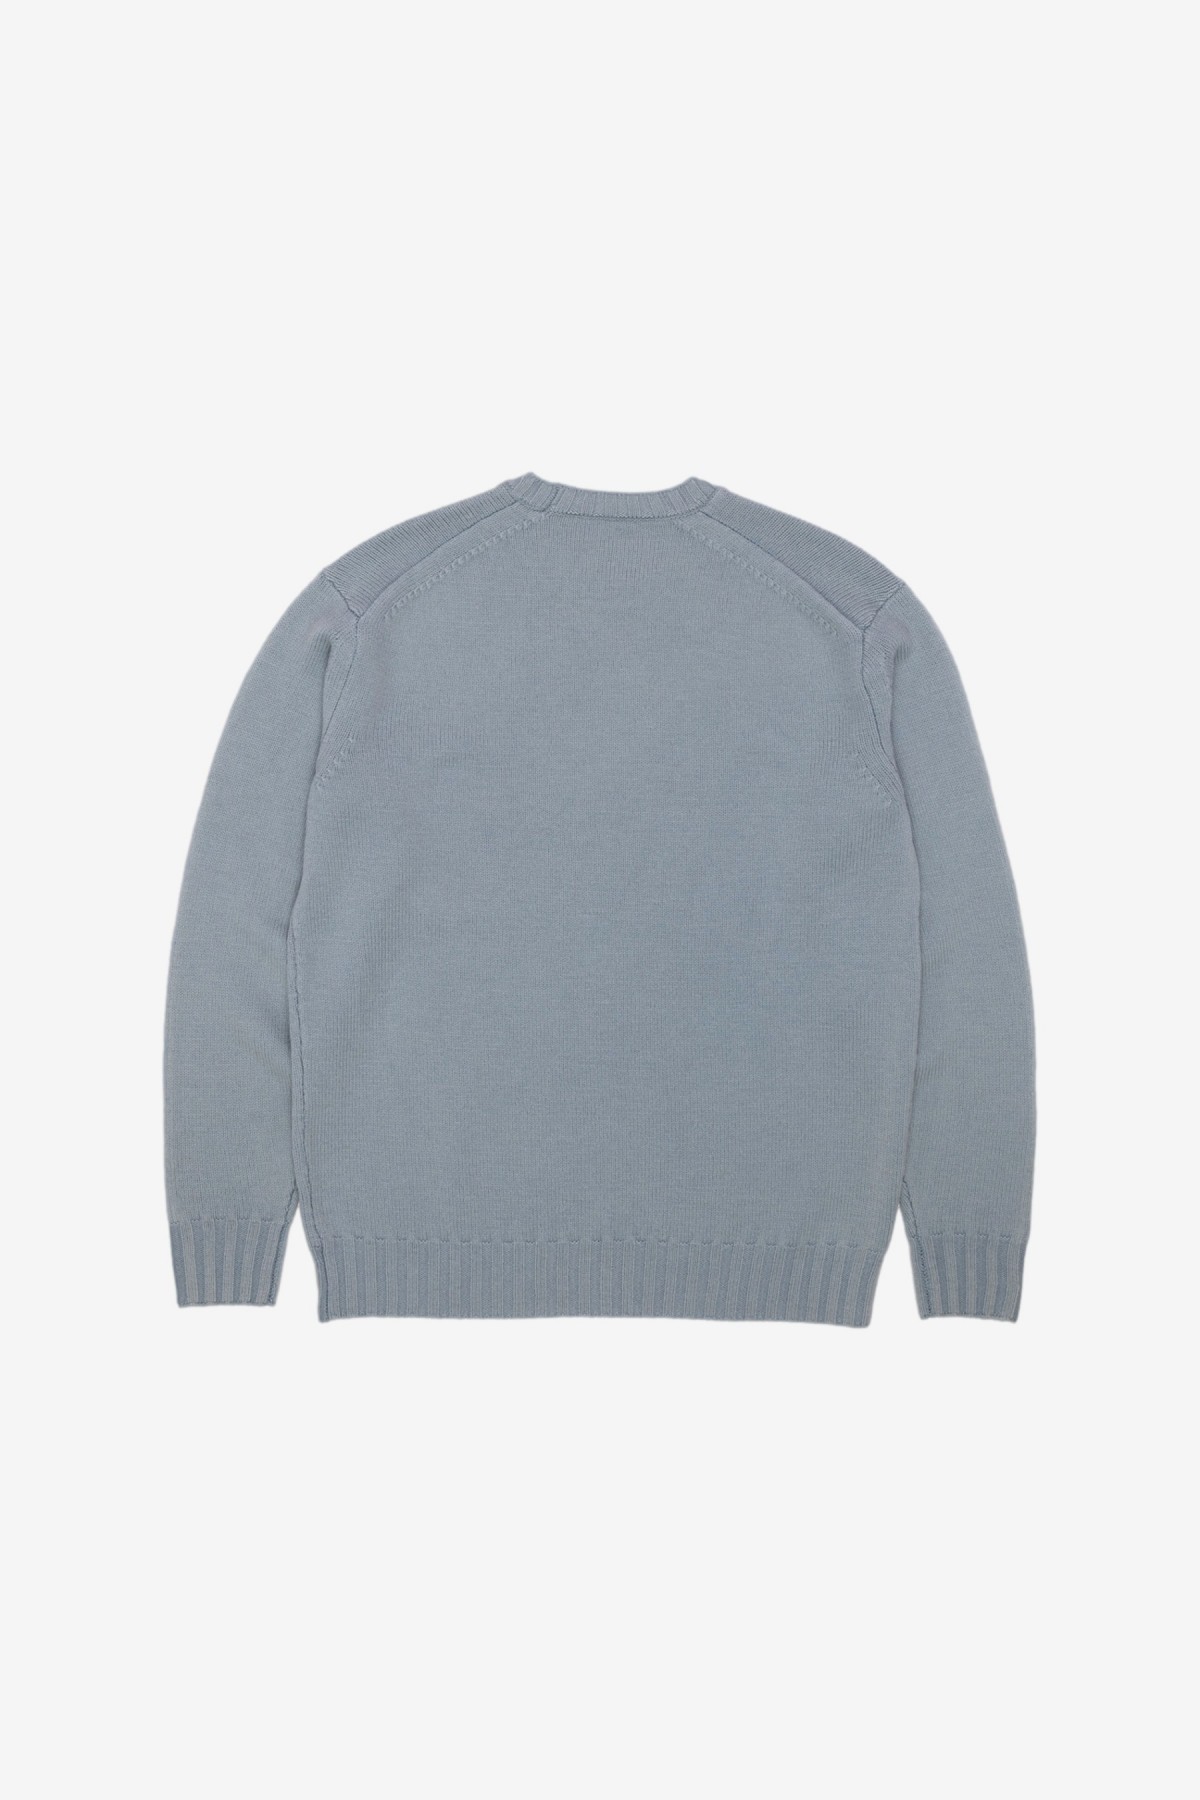 Auralee Washed French Merino Knit P/O in Light Blue